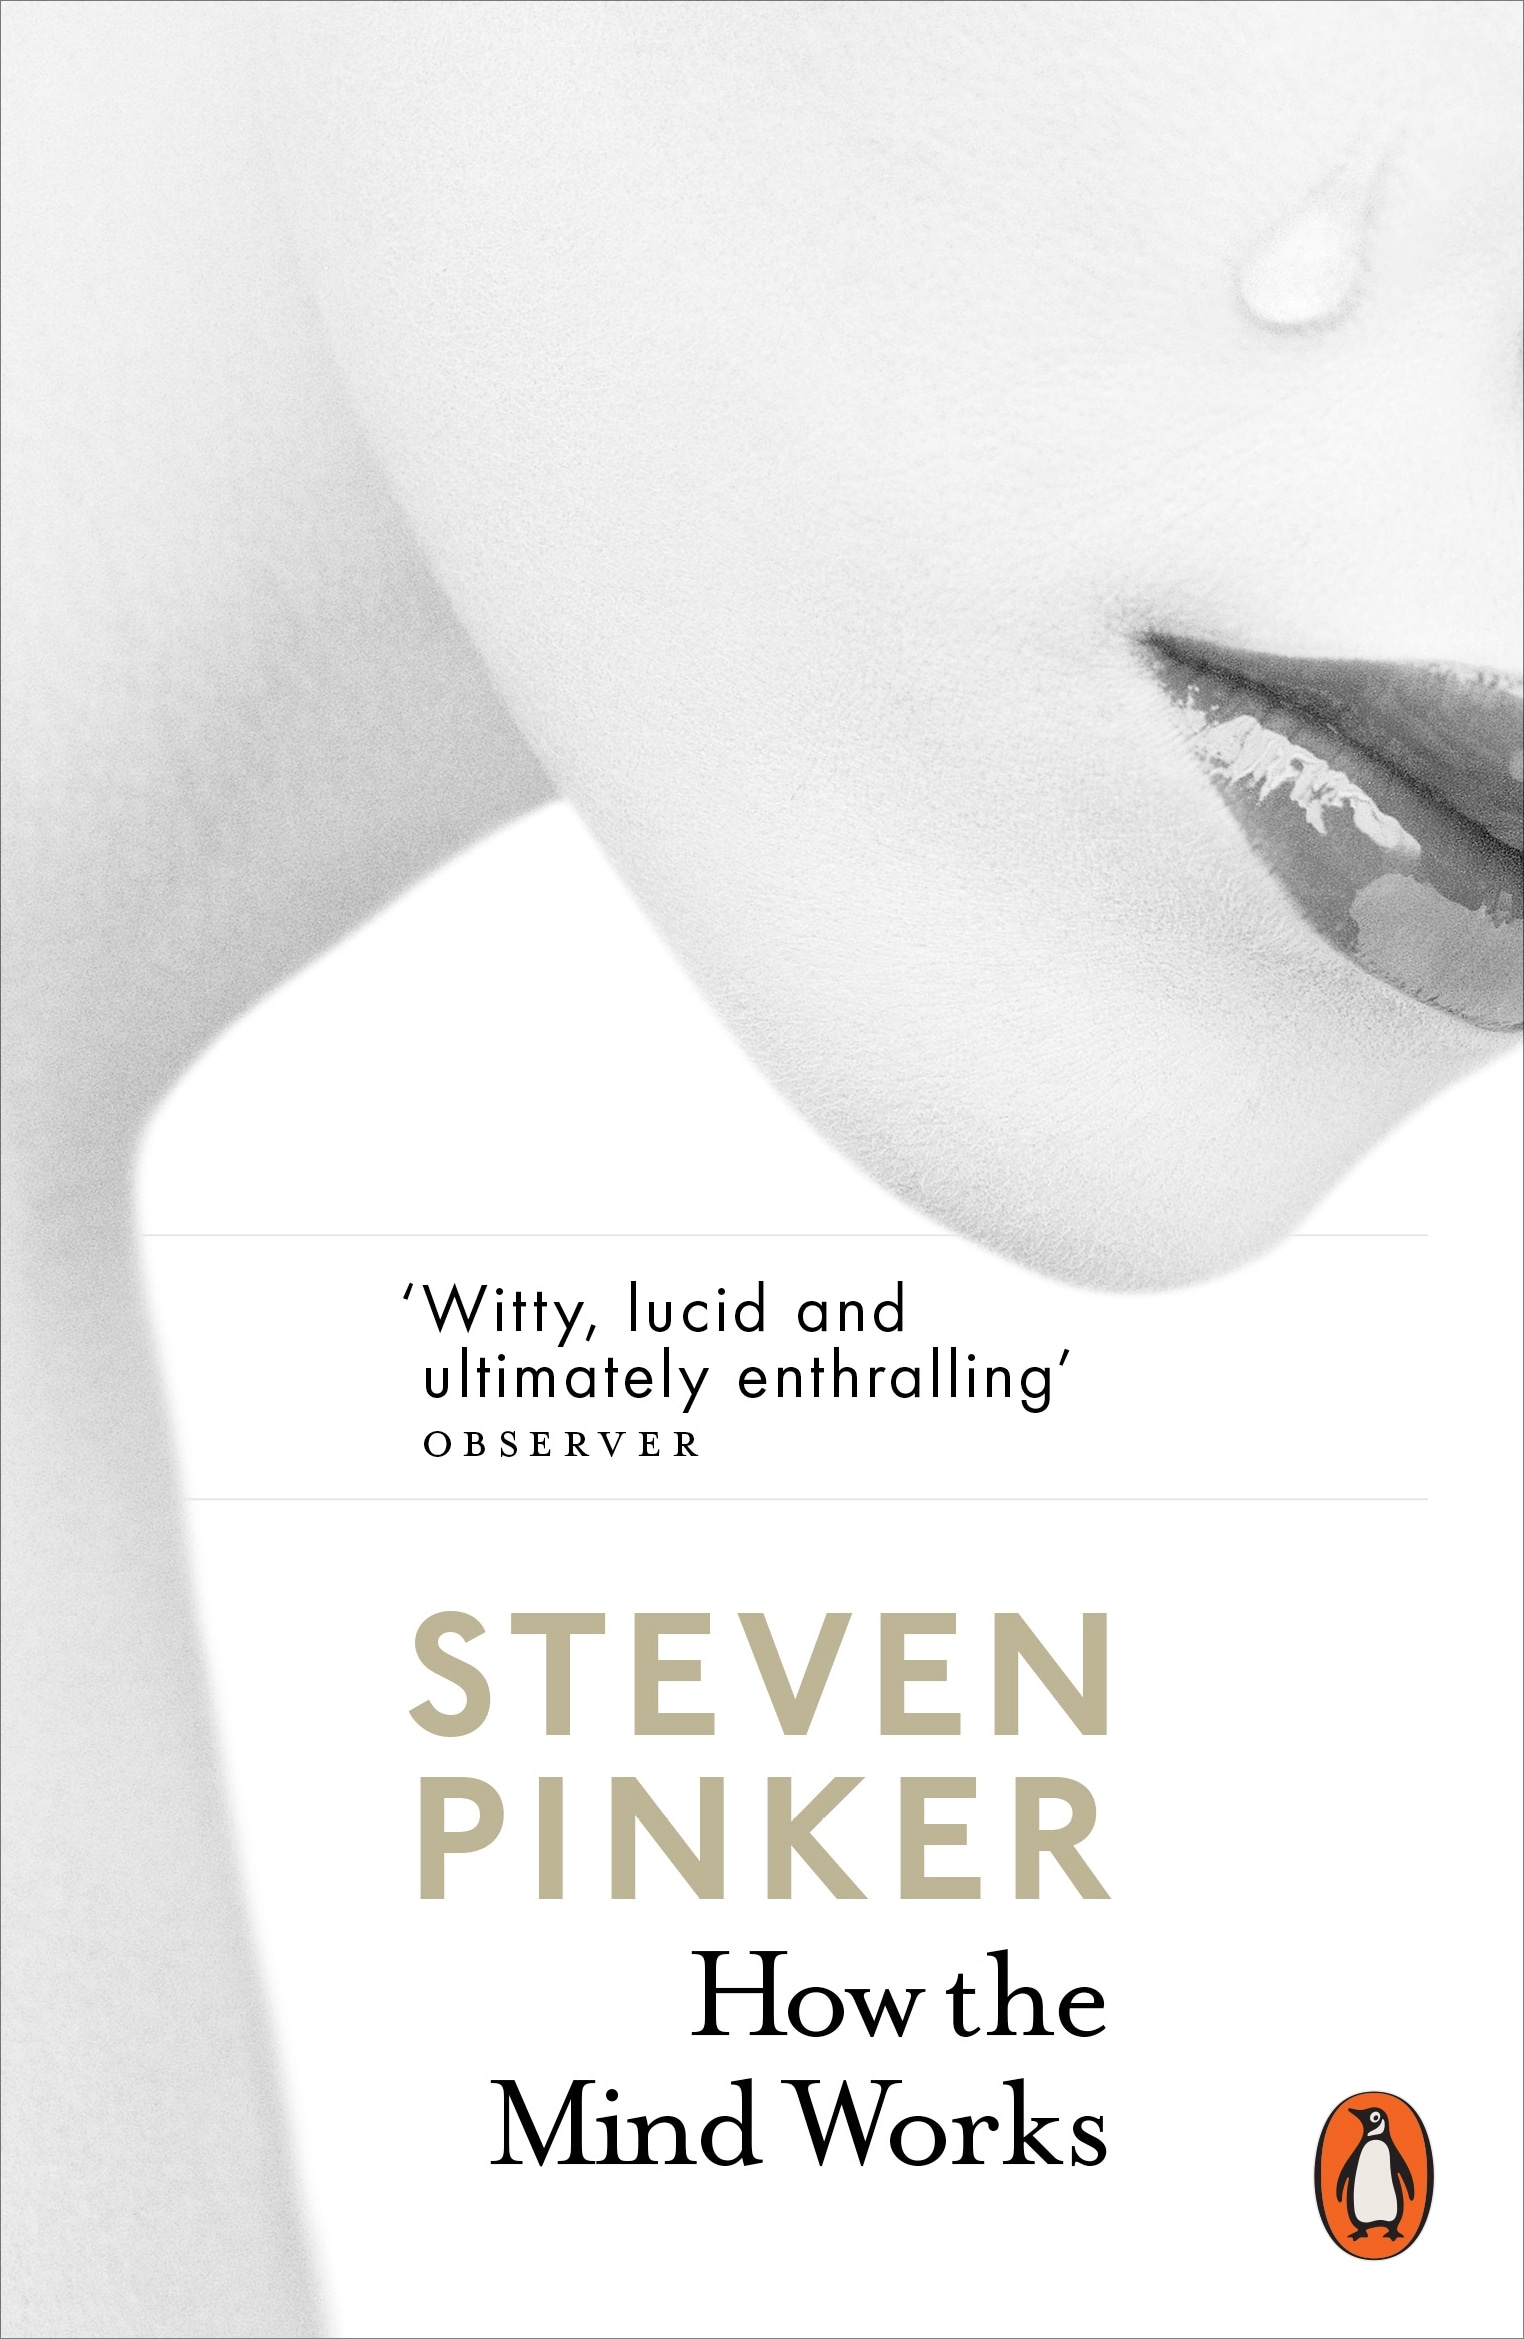 Book “How the Mind Works” by Steven Pinker